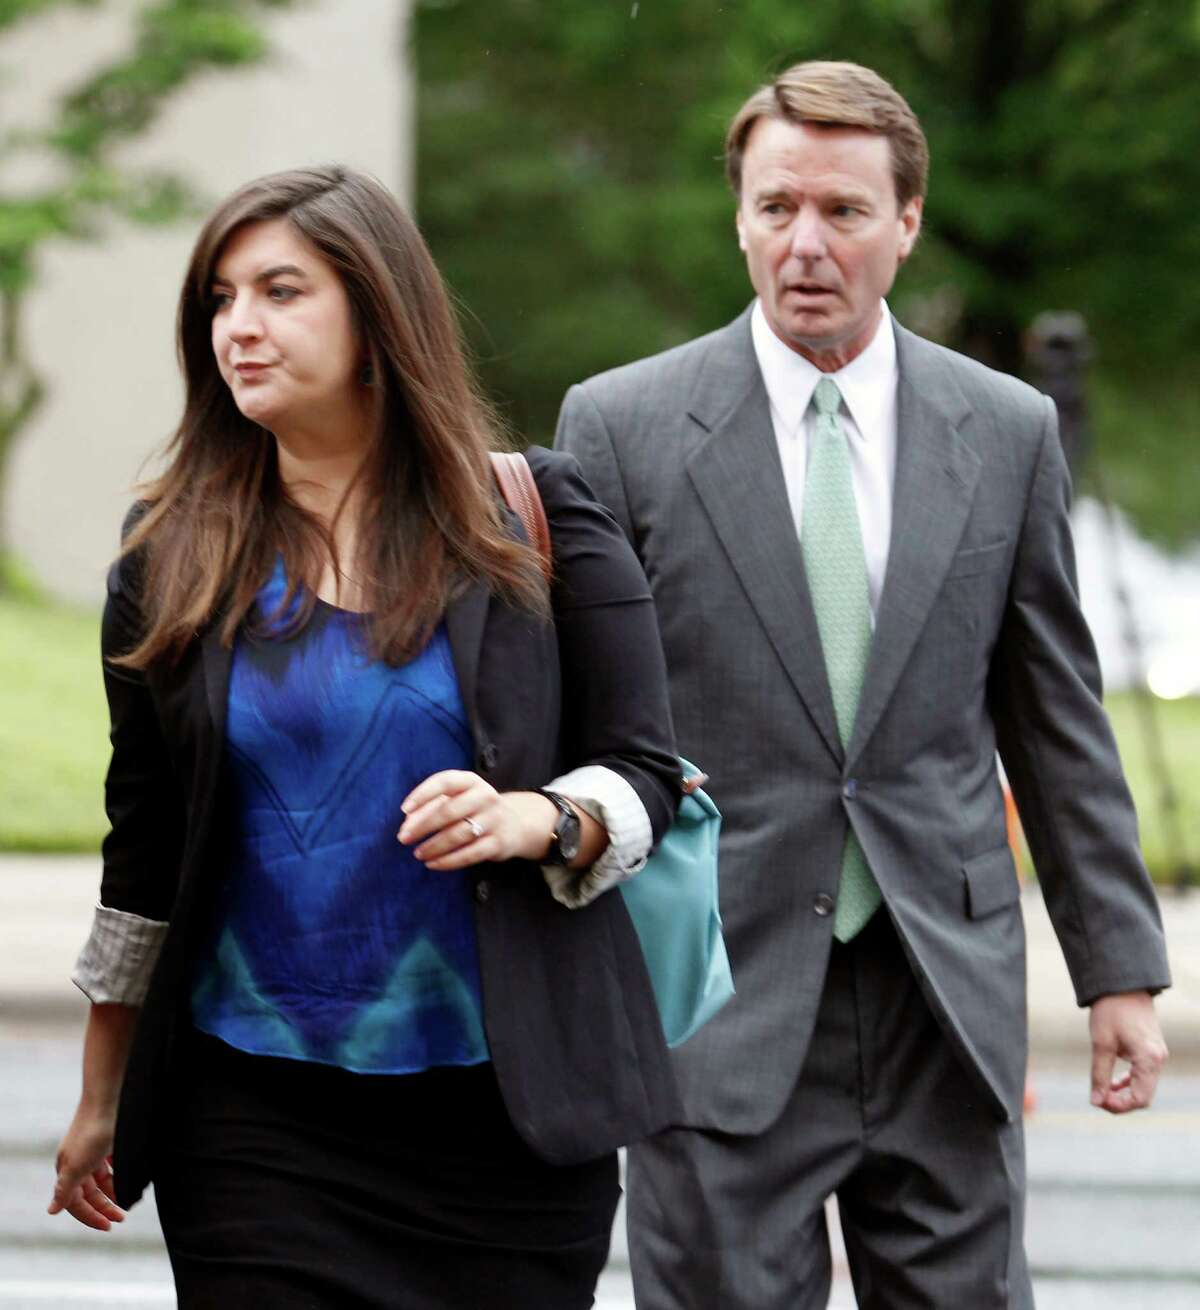 Cate Edwards leads her father, John Edwards, into the federal courthouse in Greensboro, N.C., as the defense starts in his campaign corruption trial, Monday, May 14, 2012. (AP Photo/Bob Leverone)